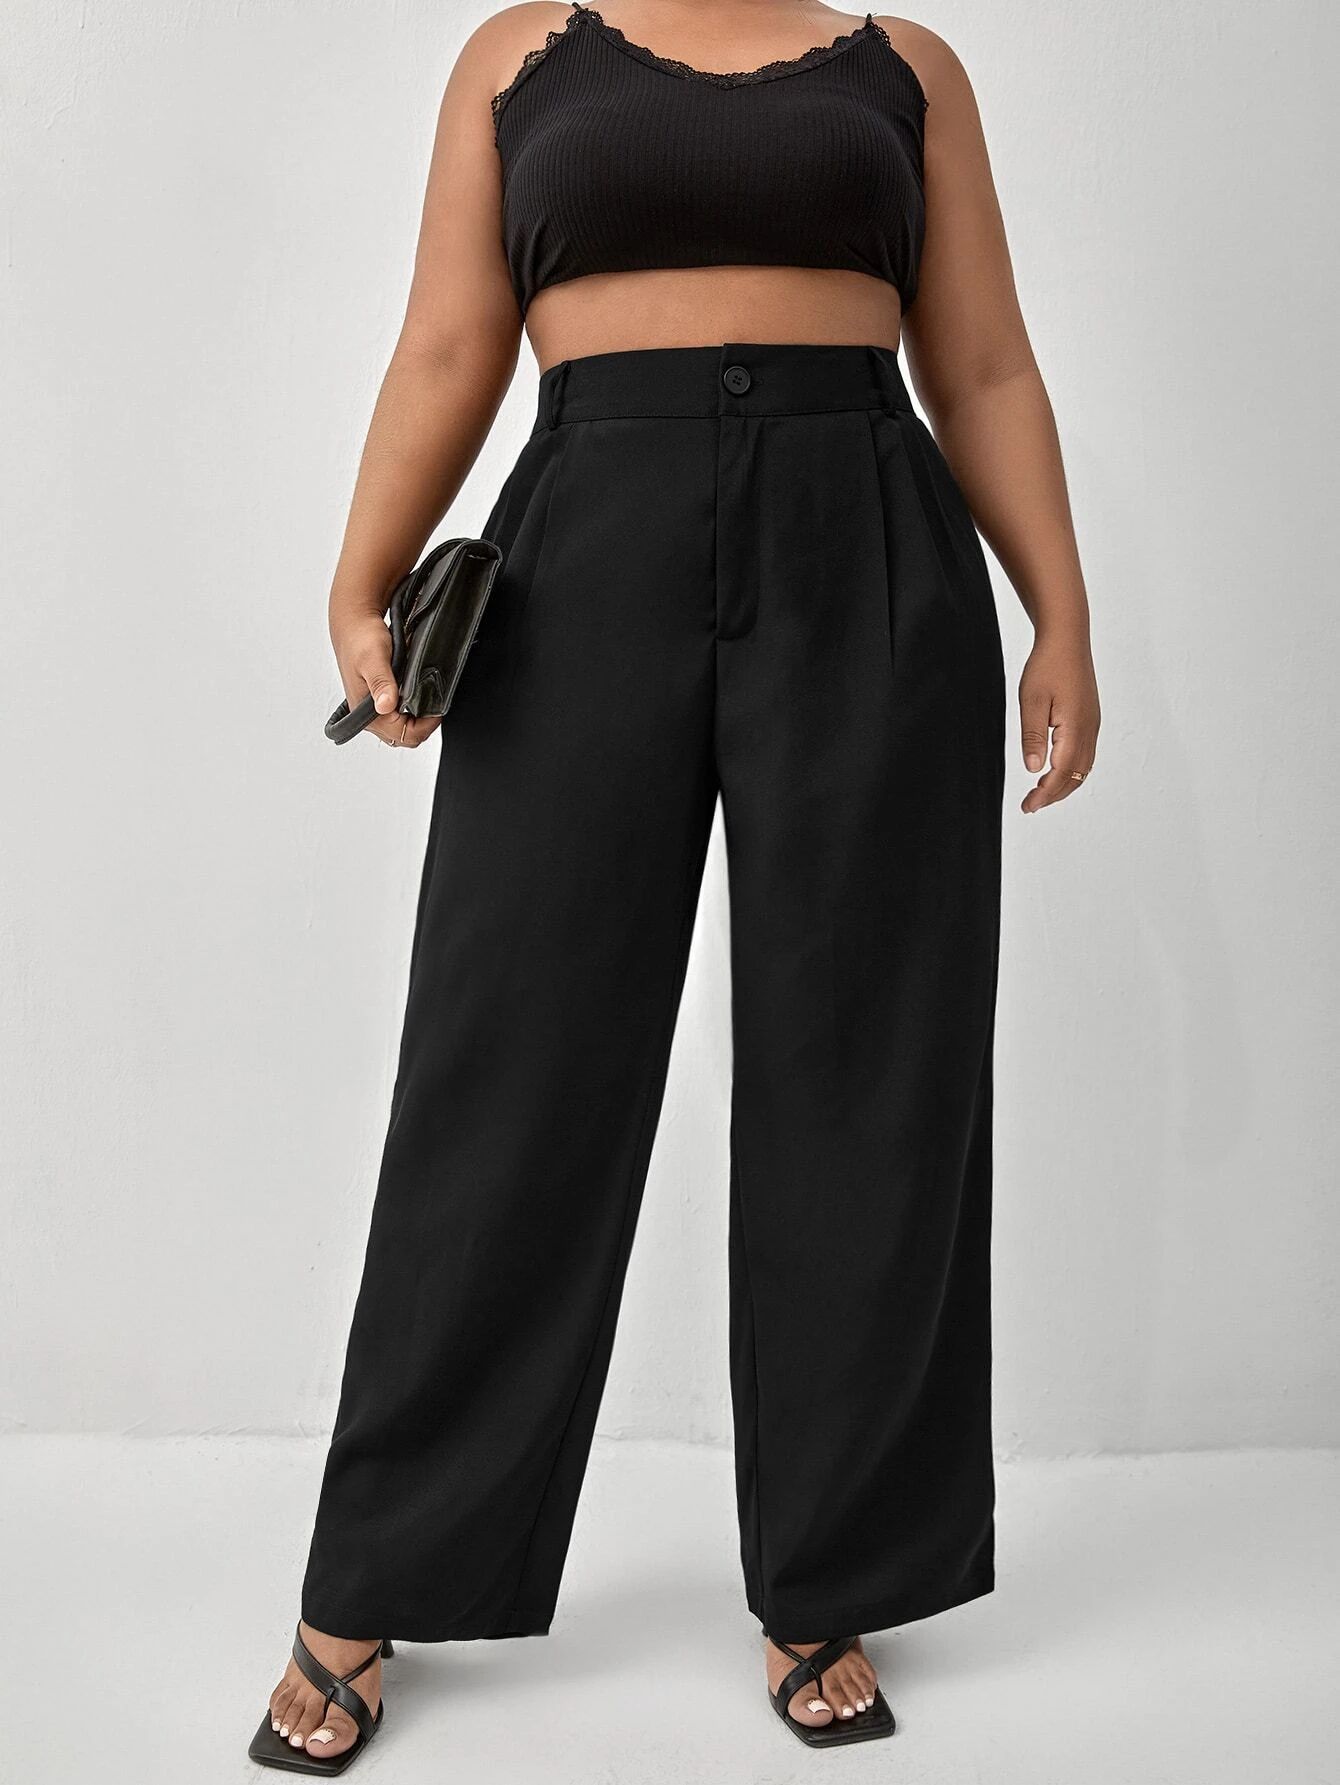 SHEIN Frenchy Plus High Waist Fold Pleated Tailored Pants | SHEIN